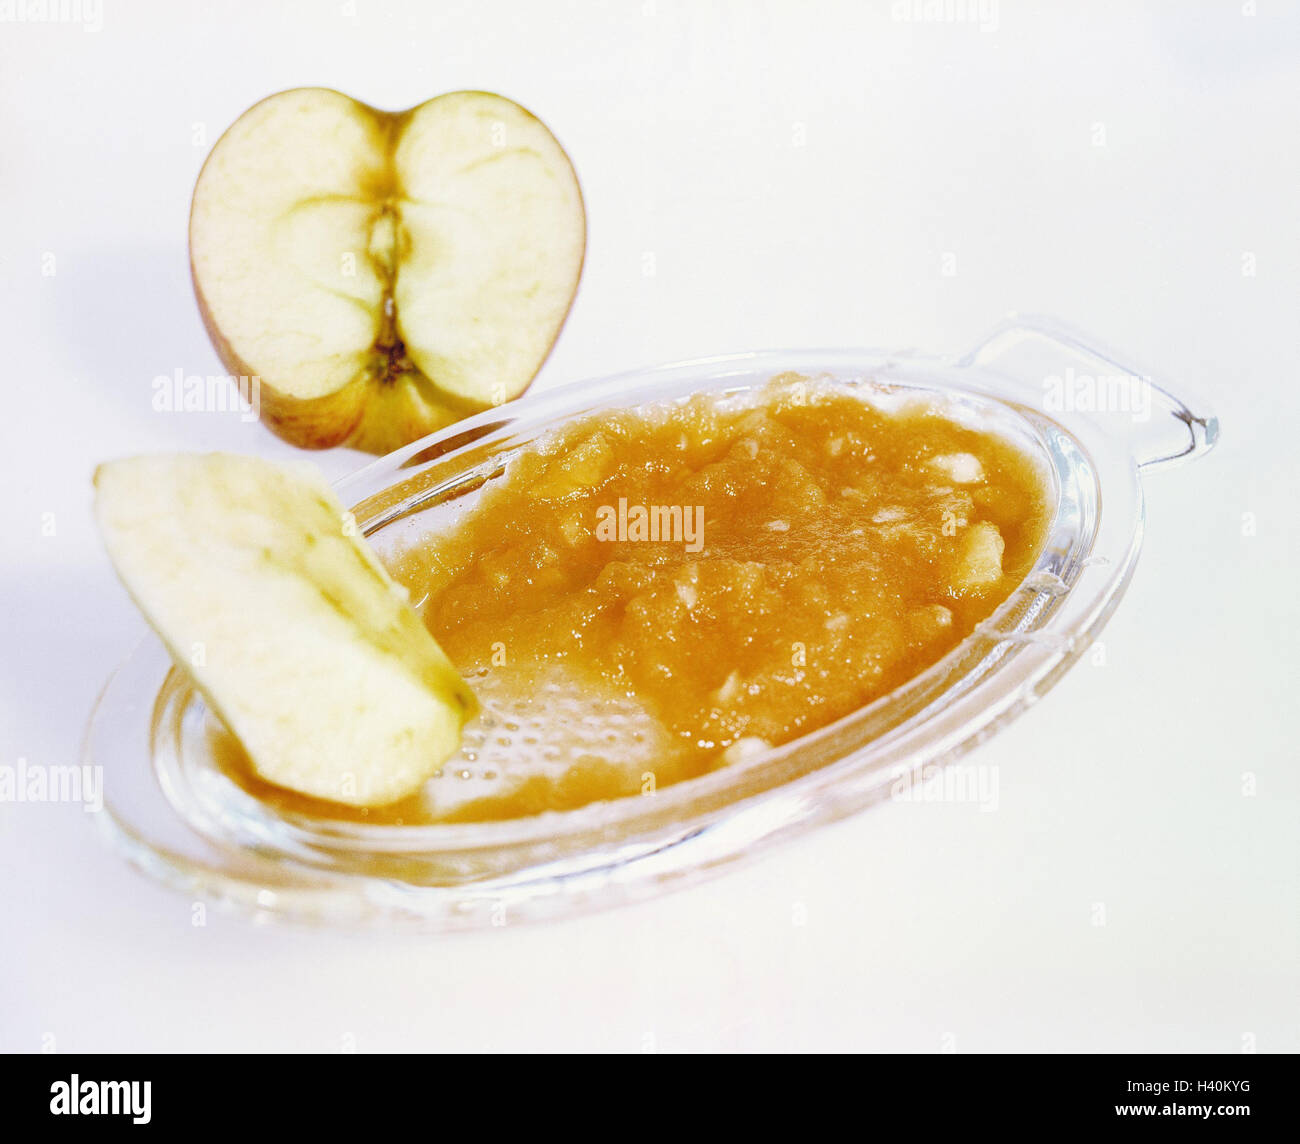 Glass grater, apple, grated, medicine, alternatively, drug, house means, diarrhoeia means, diarrhoeia therapy, nature drug, antidote, natural, bowel illness, diarrhoeia, Diarrhö, diarrhoeia, grater, apple grater, glass, apple pulp, nutrition, healthy, mat Stock Photo